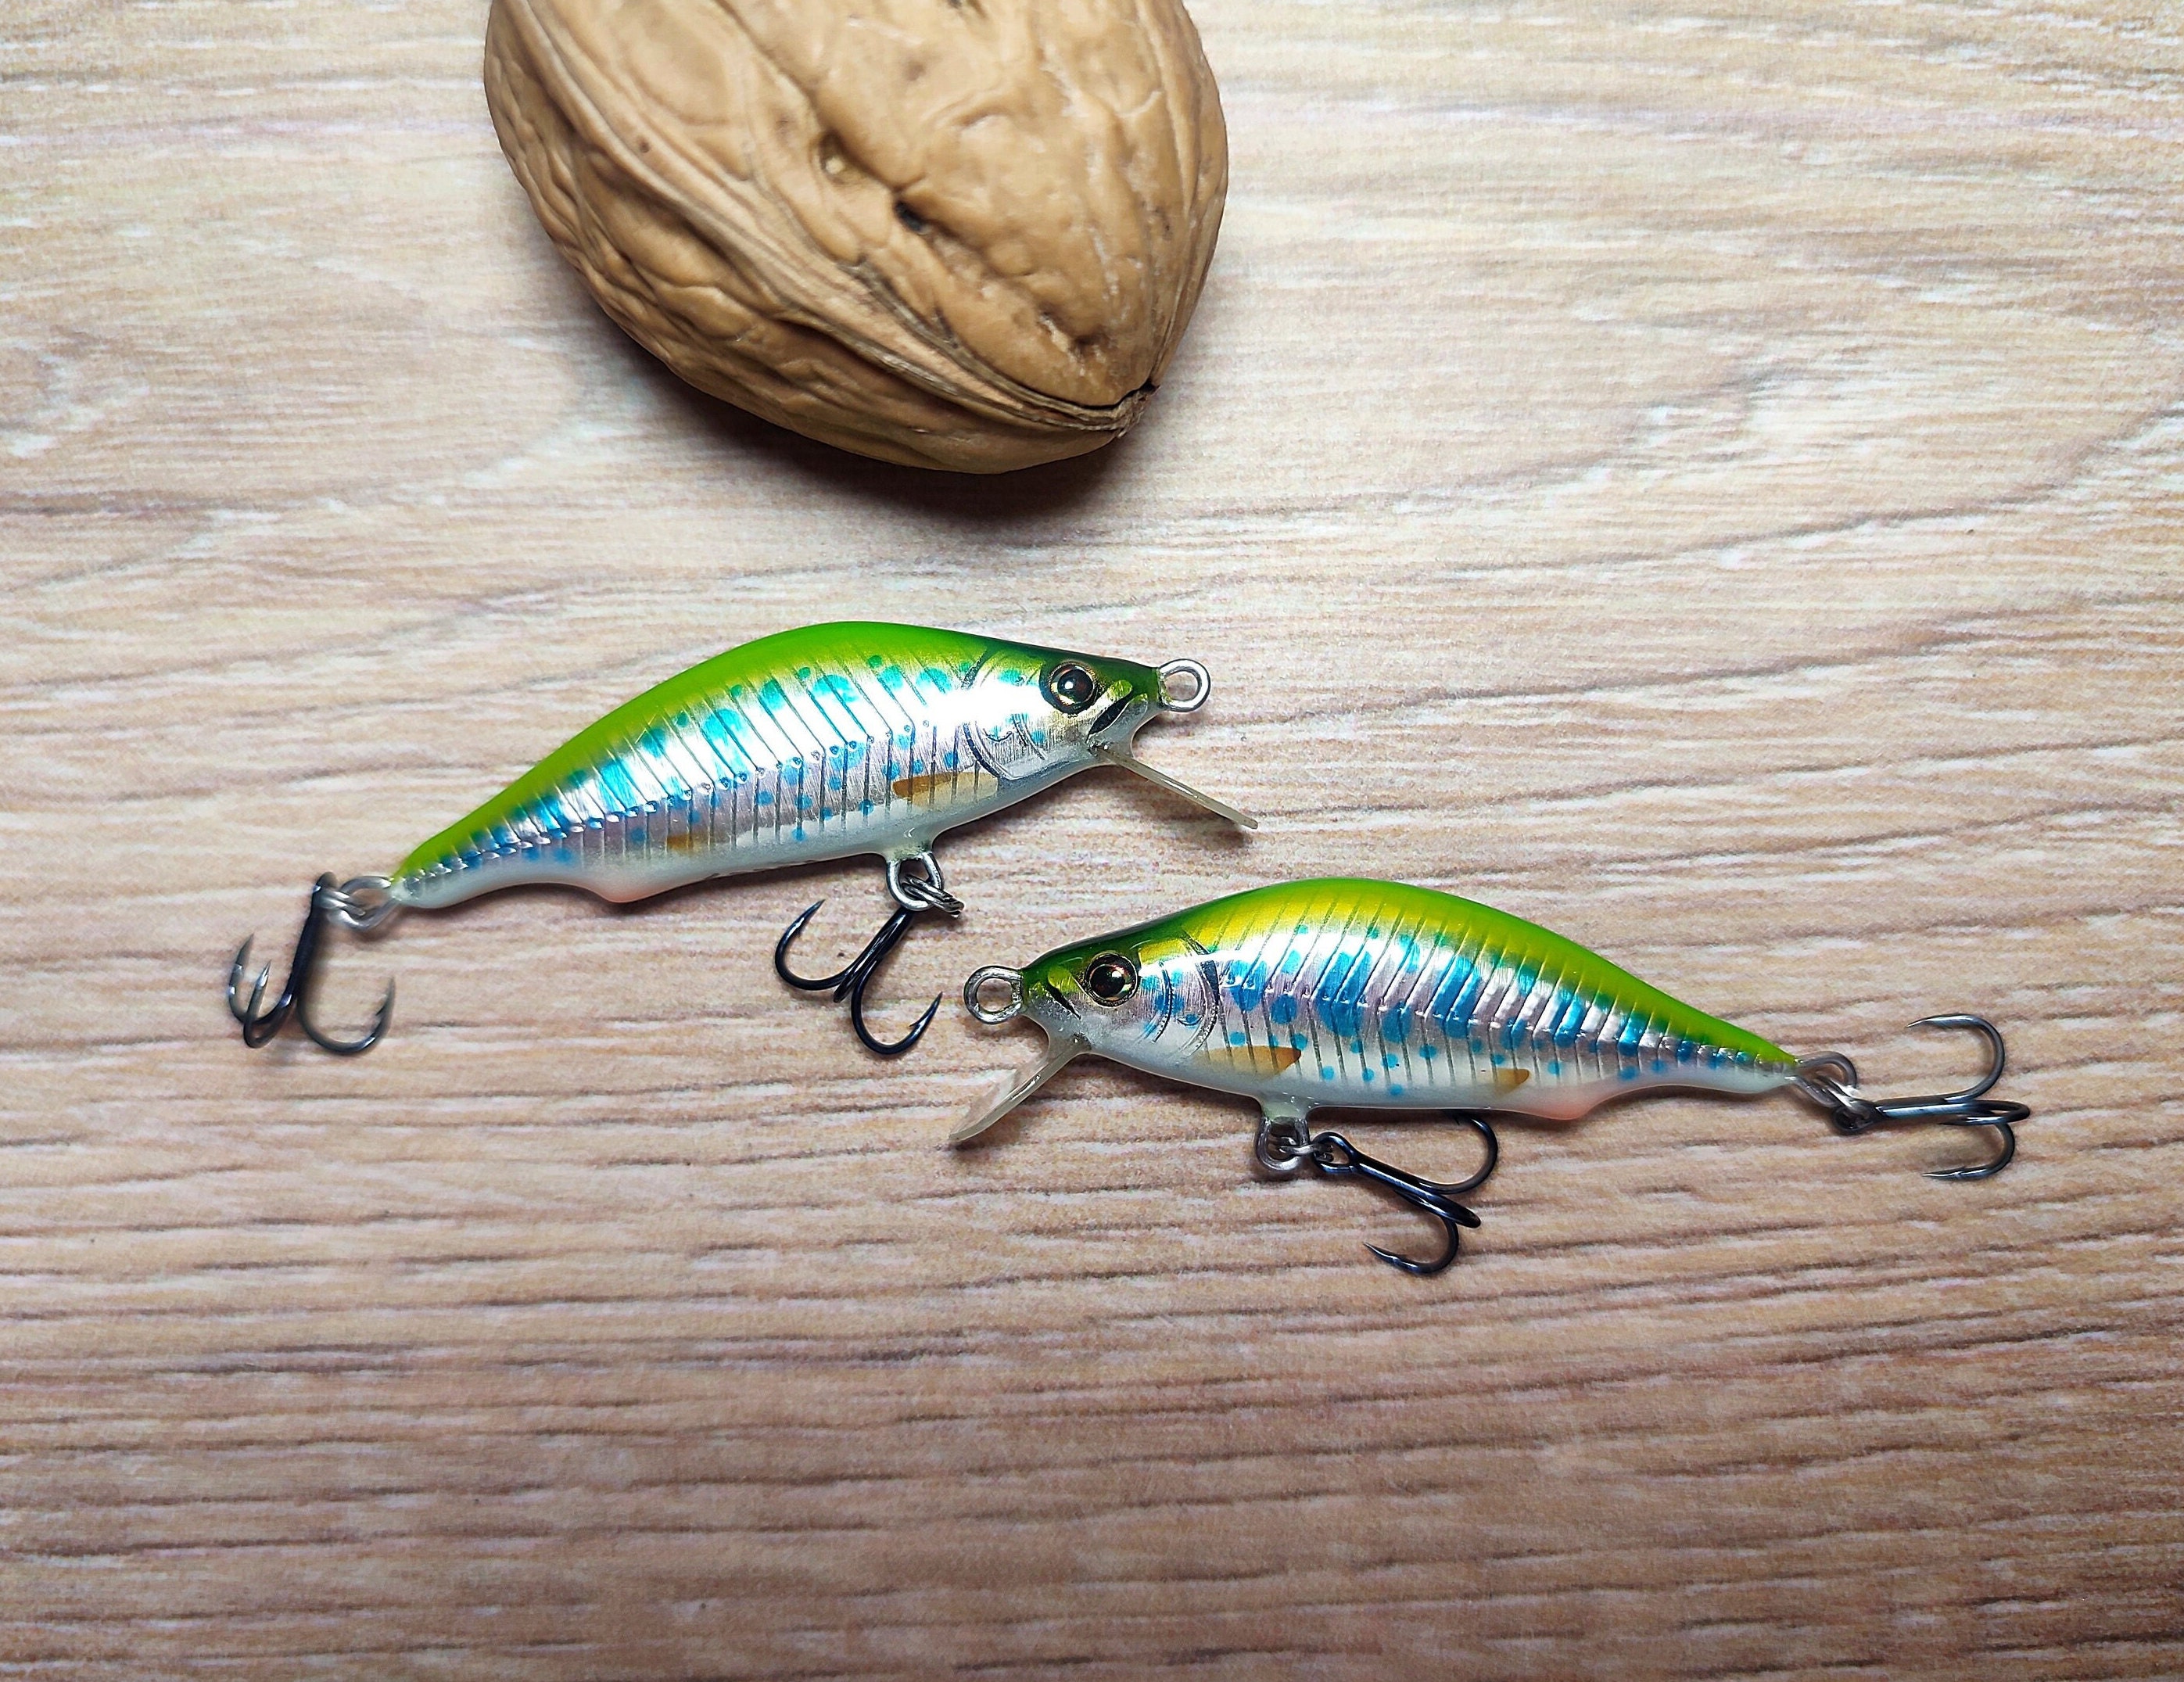 Veles Handcrafted Lure 43mm-3.2gr Fast Sinking.trout Fishing Lure.twitching  Action Bait.made From Balsa Wood.treble Hooks.gift for Fisherman 